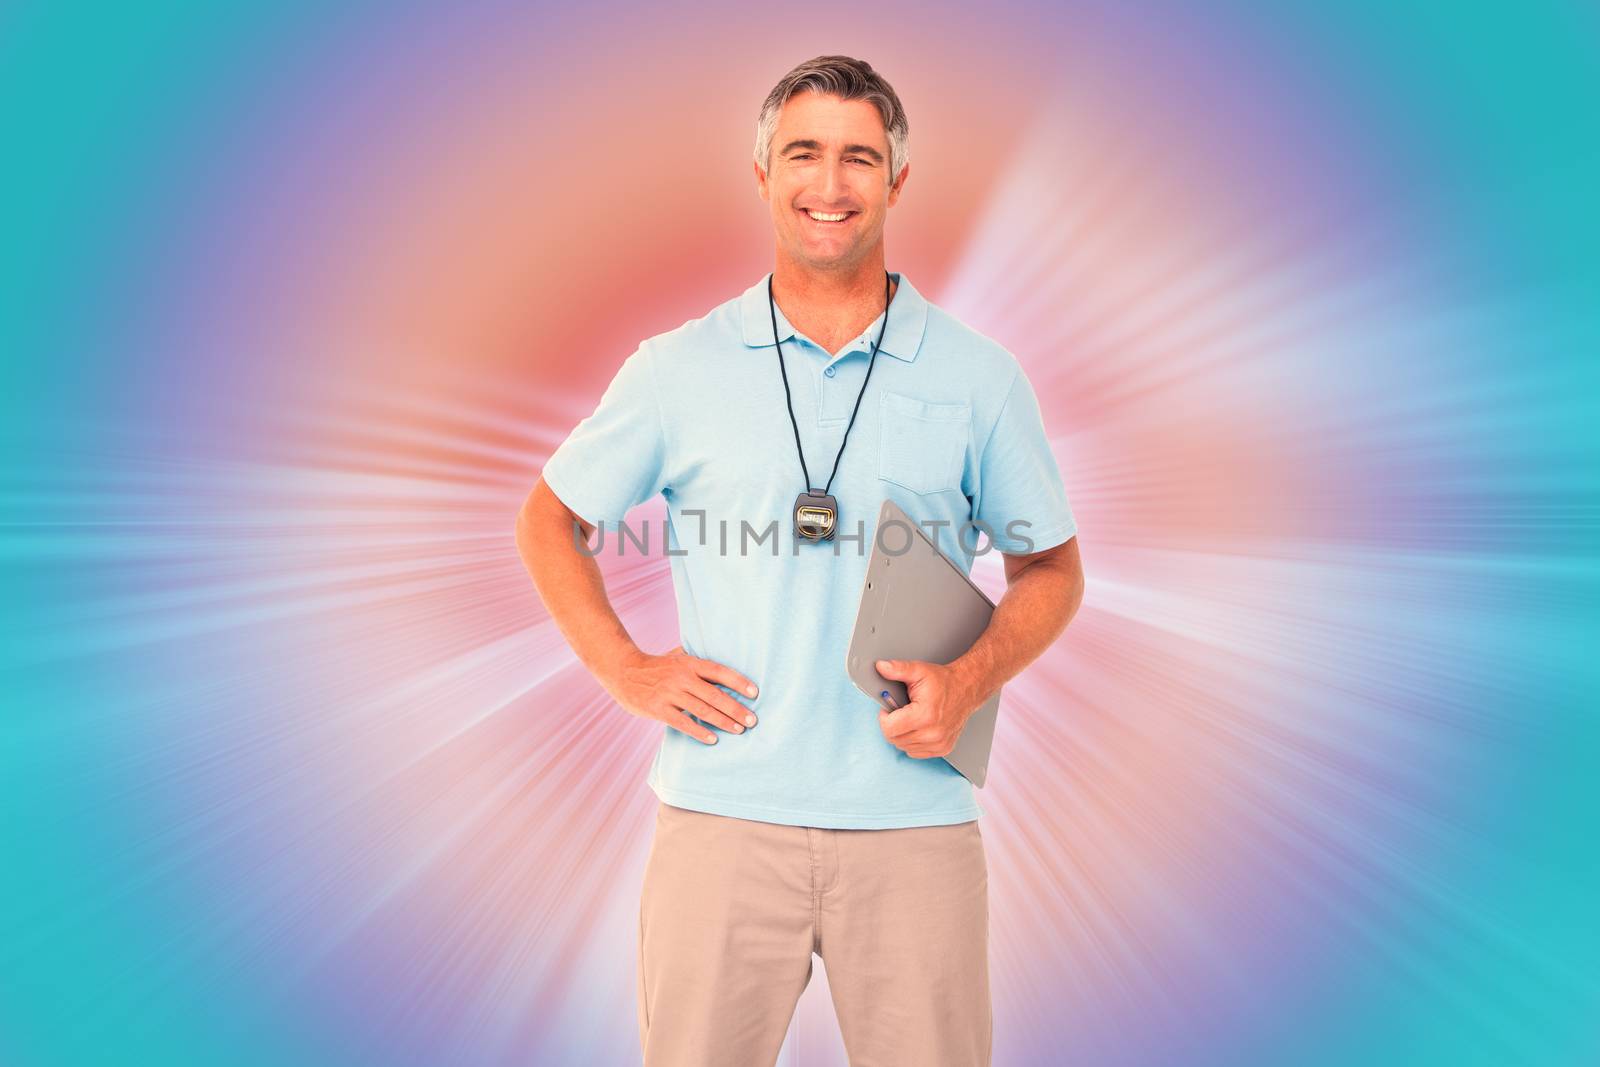 Composite image of trainer smiling at the camera by Wavebreakmedia